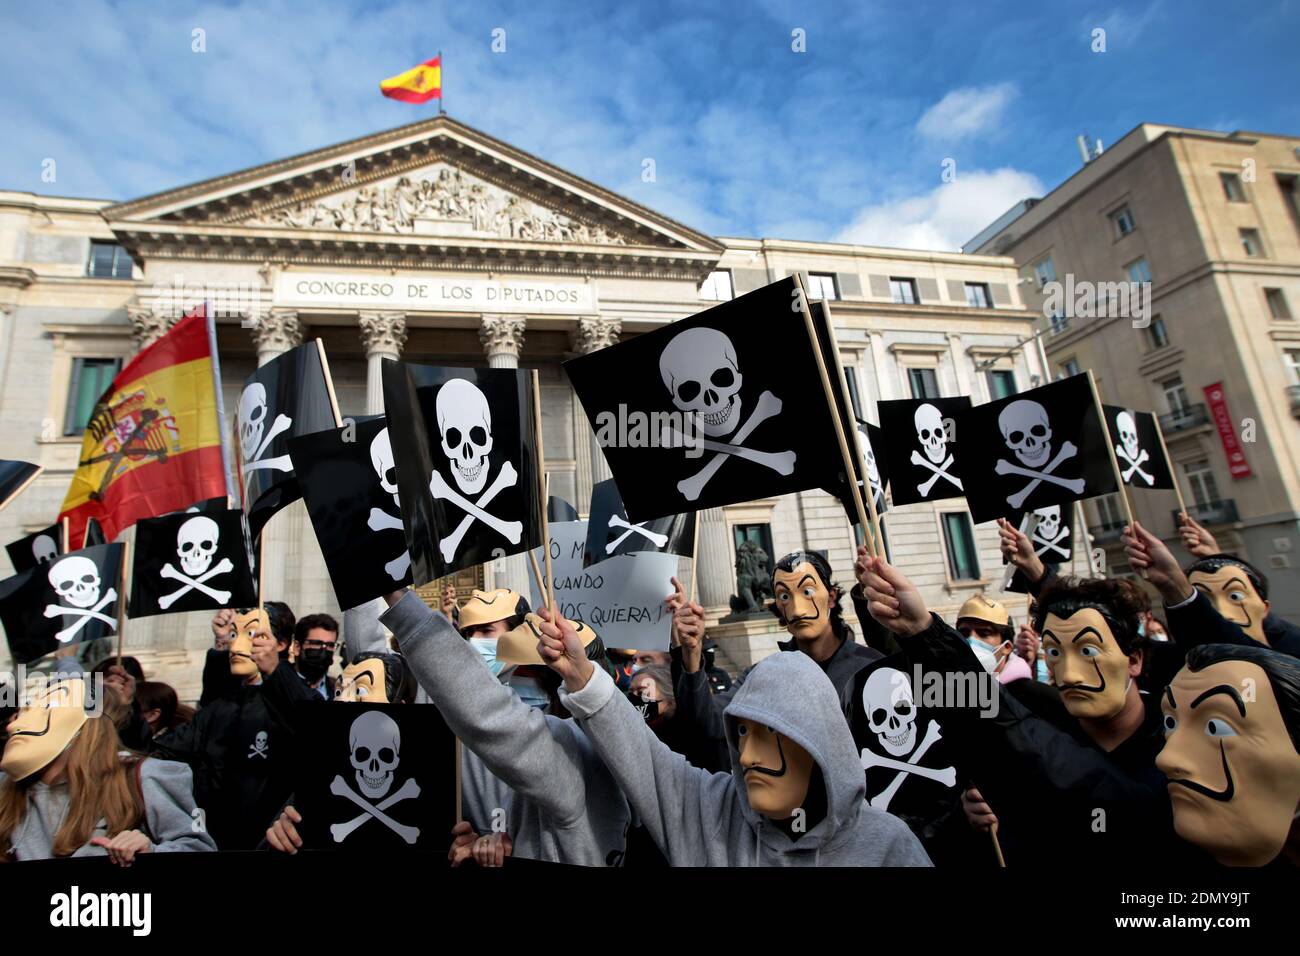 Madrid, Spain; 17/12/2020.- Today it is expected that the Spanish Congress of Deputies will approve organic law regulating euthanasia. Dozens of people are protesting before Congress against the euthanasia law with the slogan 'Government of death' rally, called by the 'Vividores' (Livers) campaign, promoted by the the Catholic Lawyers Association and far-right groups such as the political party Vox whose leader Santiago Abascal left Parliament to support them.The protesters have carried Spanish masks, banners and flags with the pirate symbol of the skull and two crossed femurs. They were shout Stock Photo